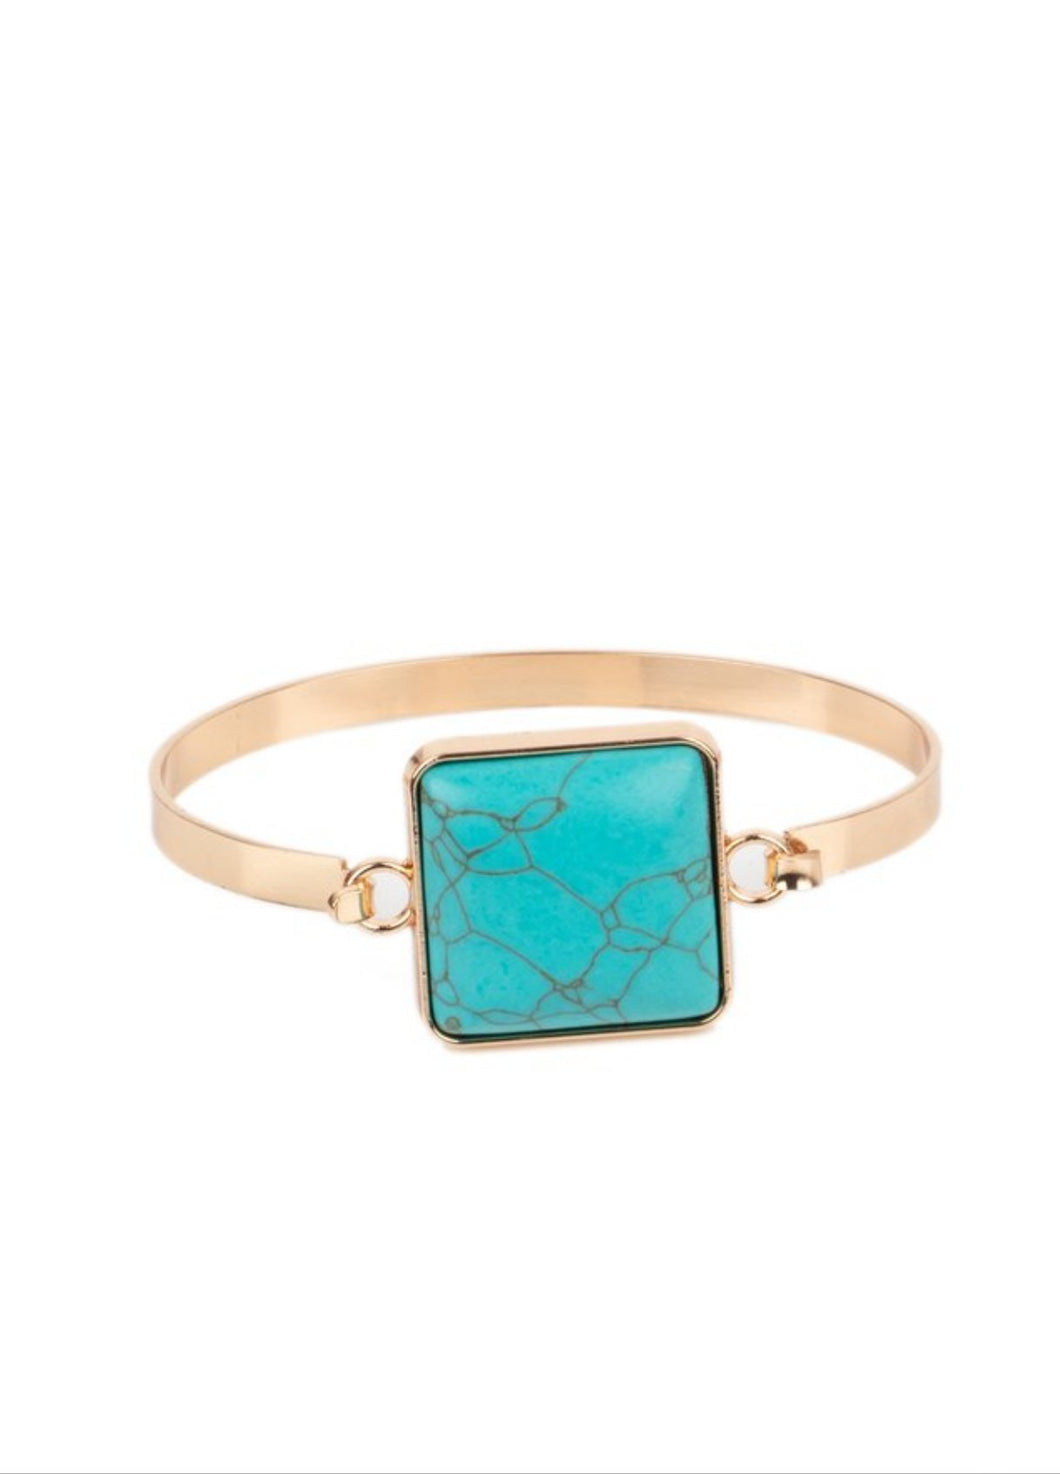 Turning a CORNERSTONE Turquoise and Gold Bracelet